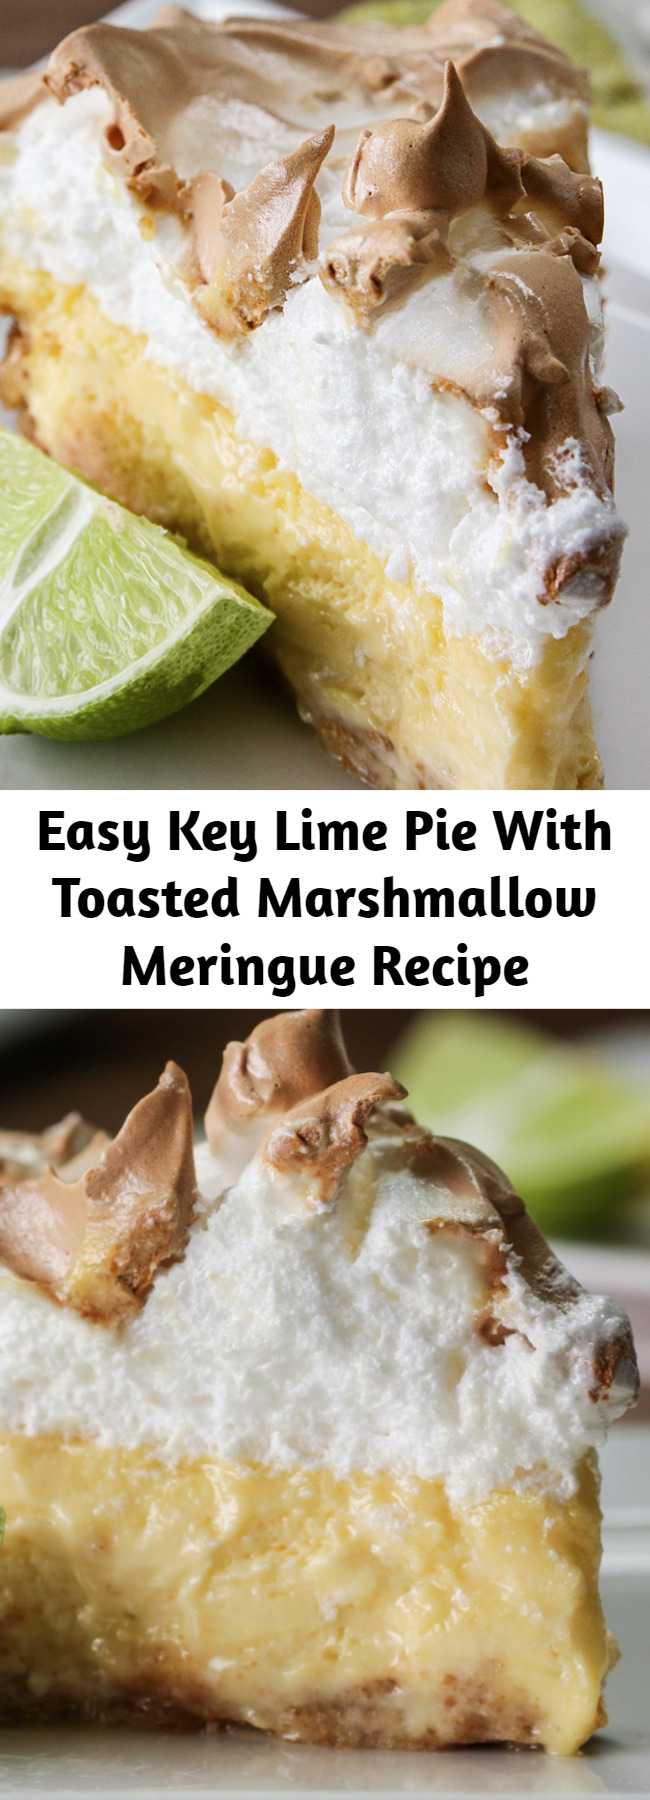 Easy Key Lime Pie With Toasted Marshmallow Meringue Recipe - This recipe is a real winner because it’s so easy but has a high wow factor both at the table and on you’re tastebuds. If you’re really pinched for time you can use pre-made graham cracker crust bases (which isn’t as shameful as not making your own pastry from scratch!), and then aside from cooking/cooling time the prep only takes 10-15 minutes total. Too easy!